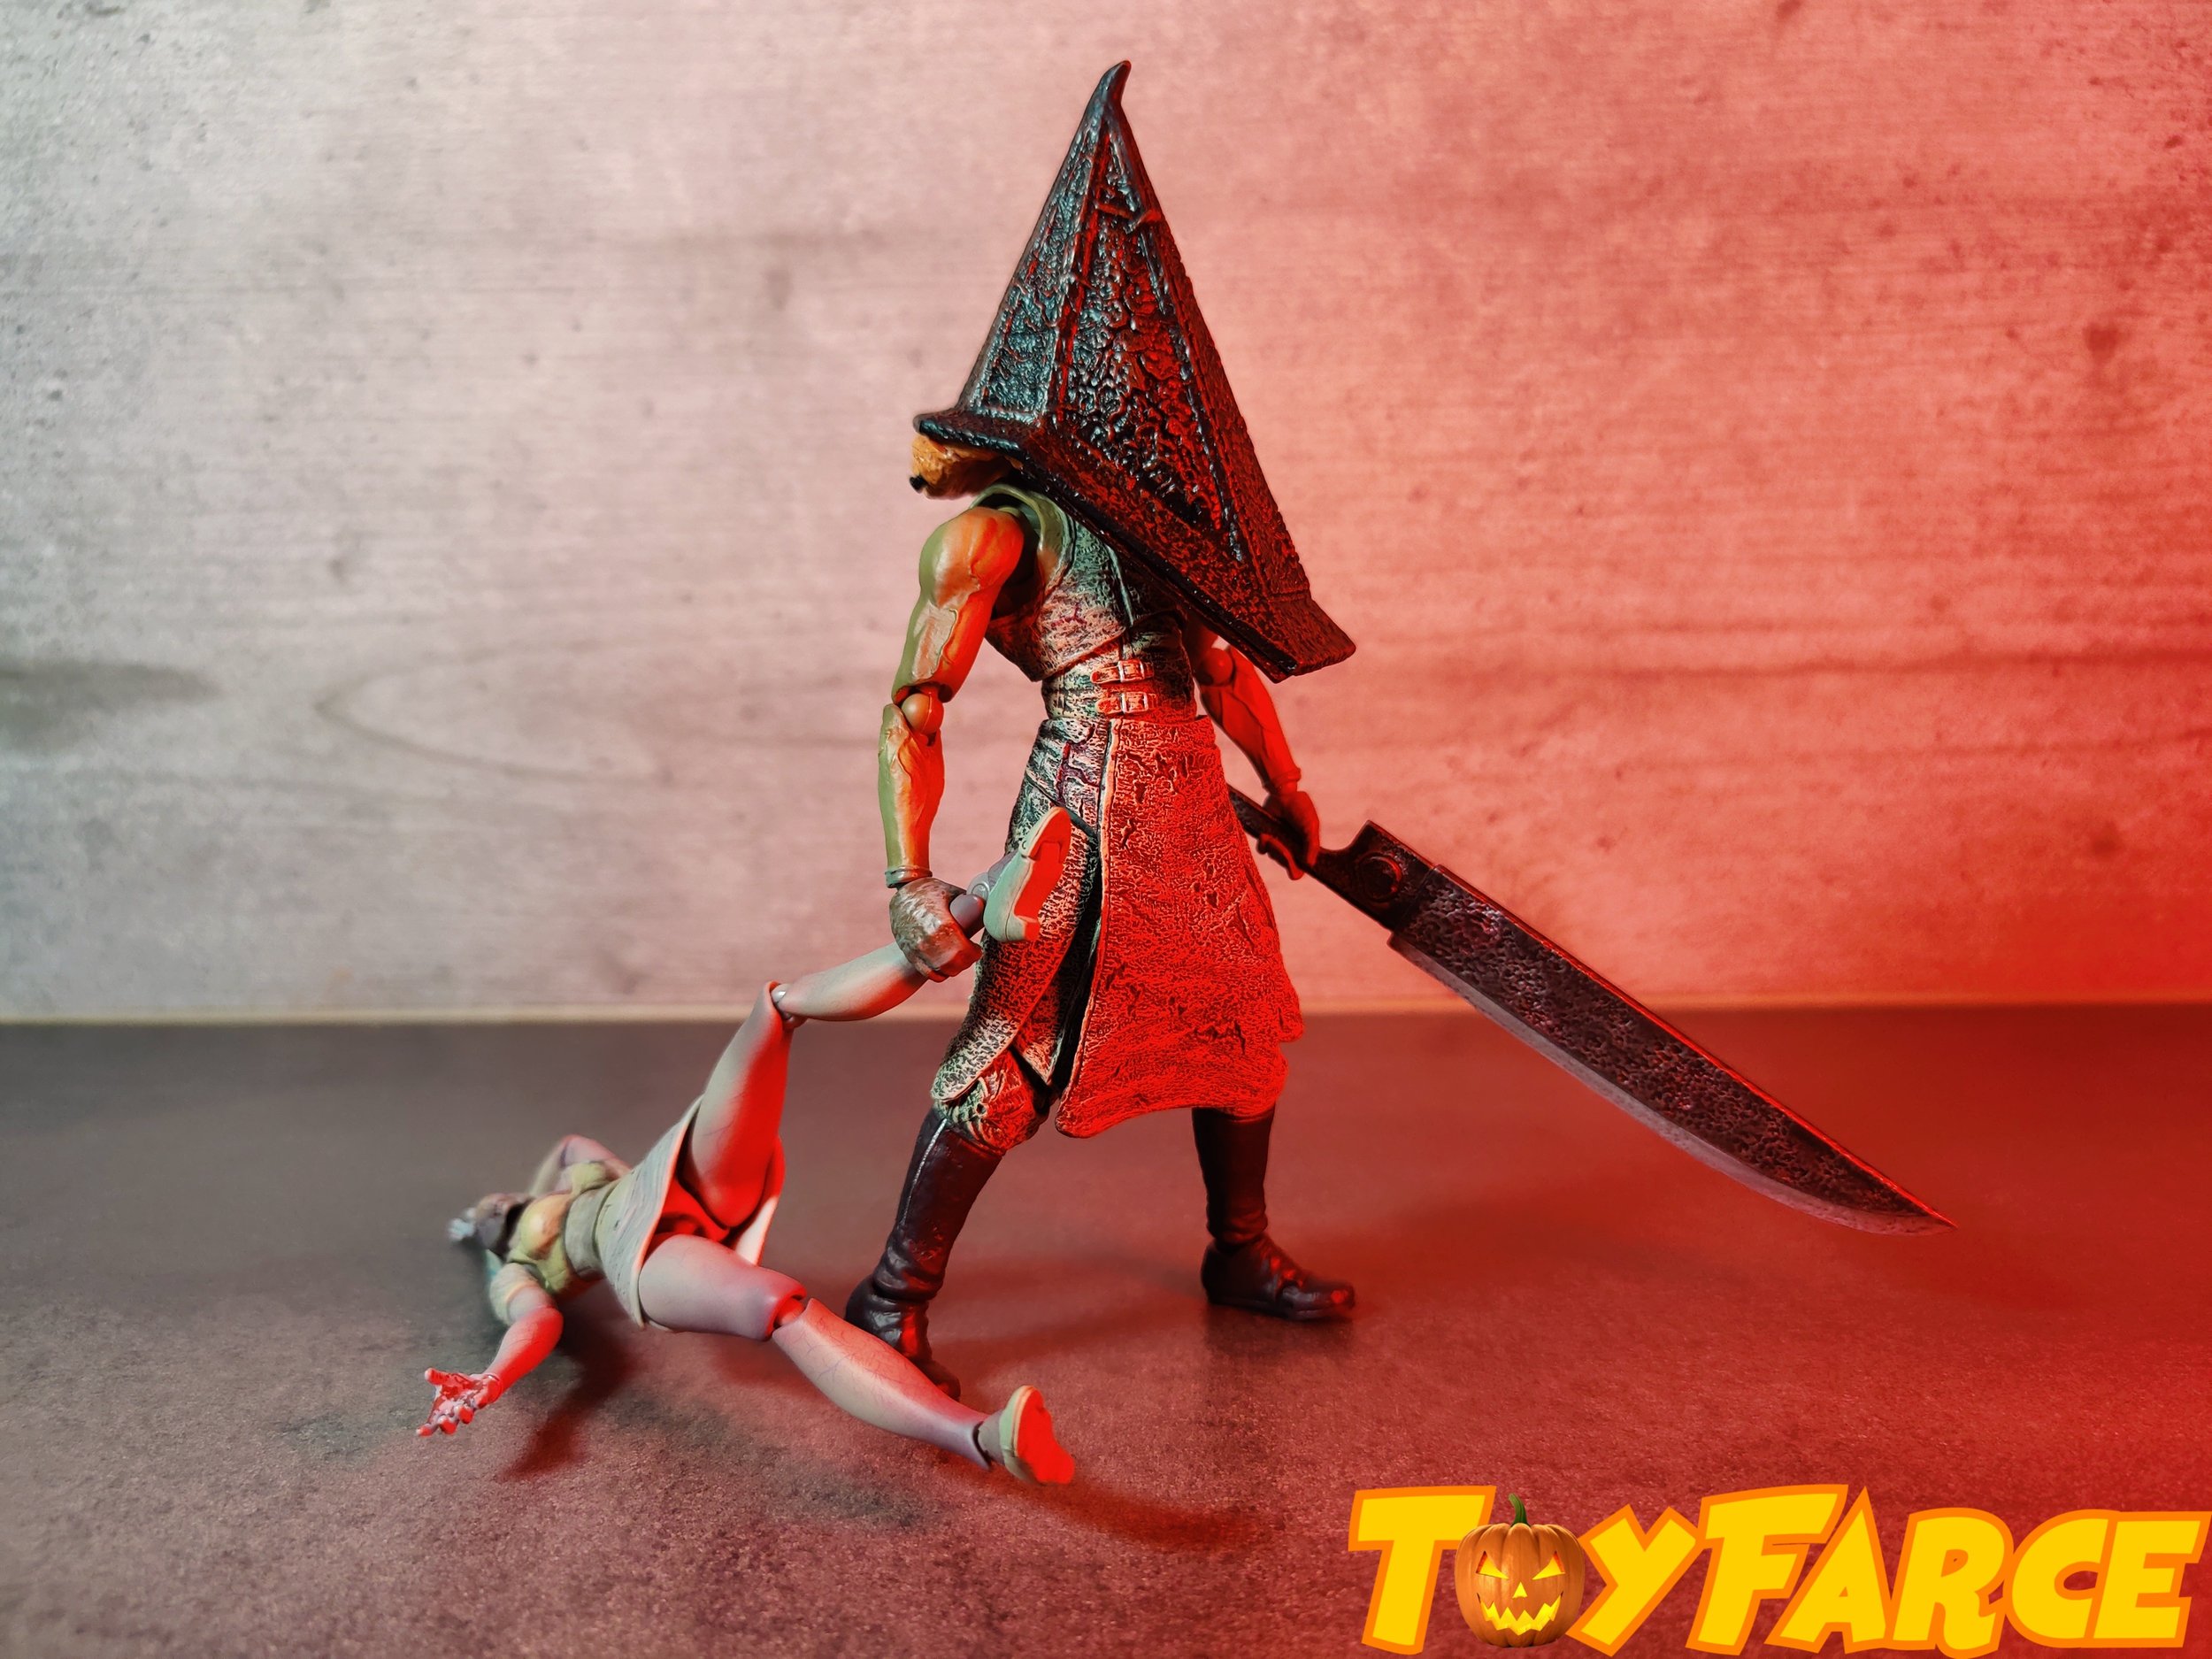 PYRAMID HEAD action figure SILENT HILL 2 red thing FIGMA bogeyman MONSTER  SP-055